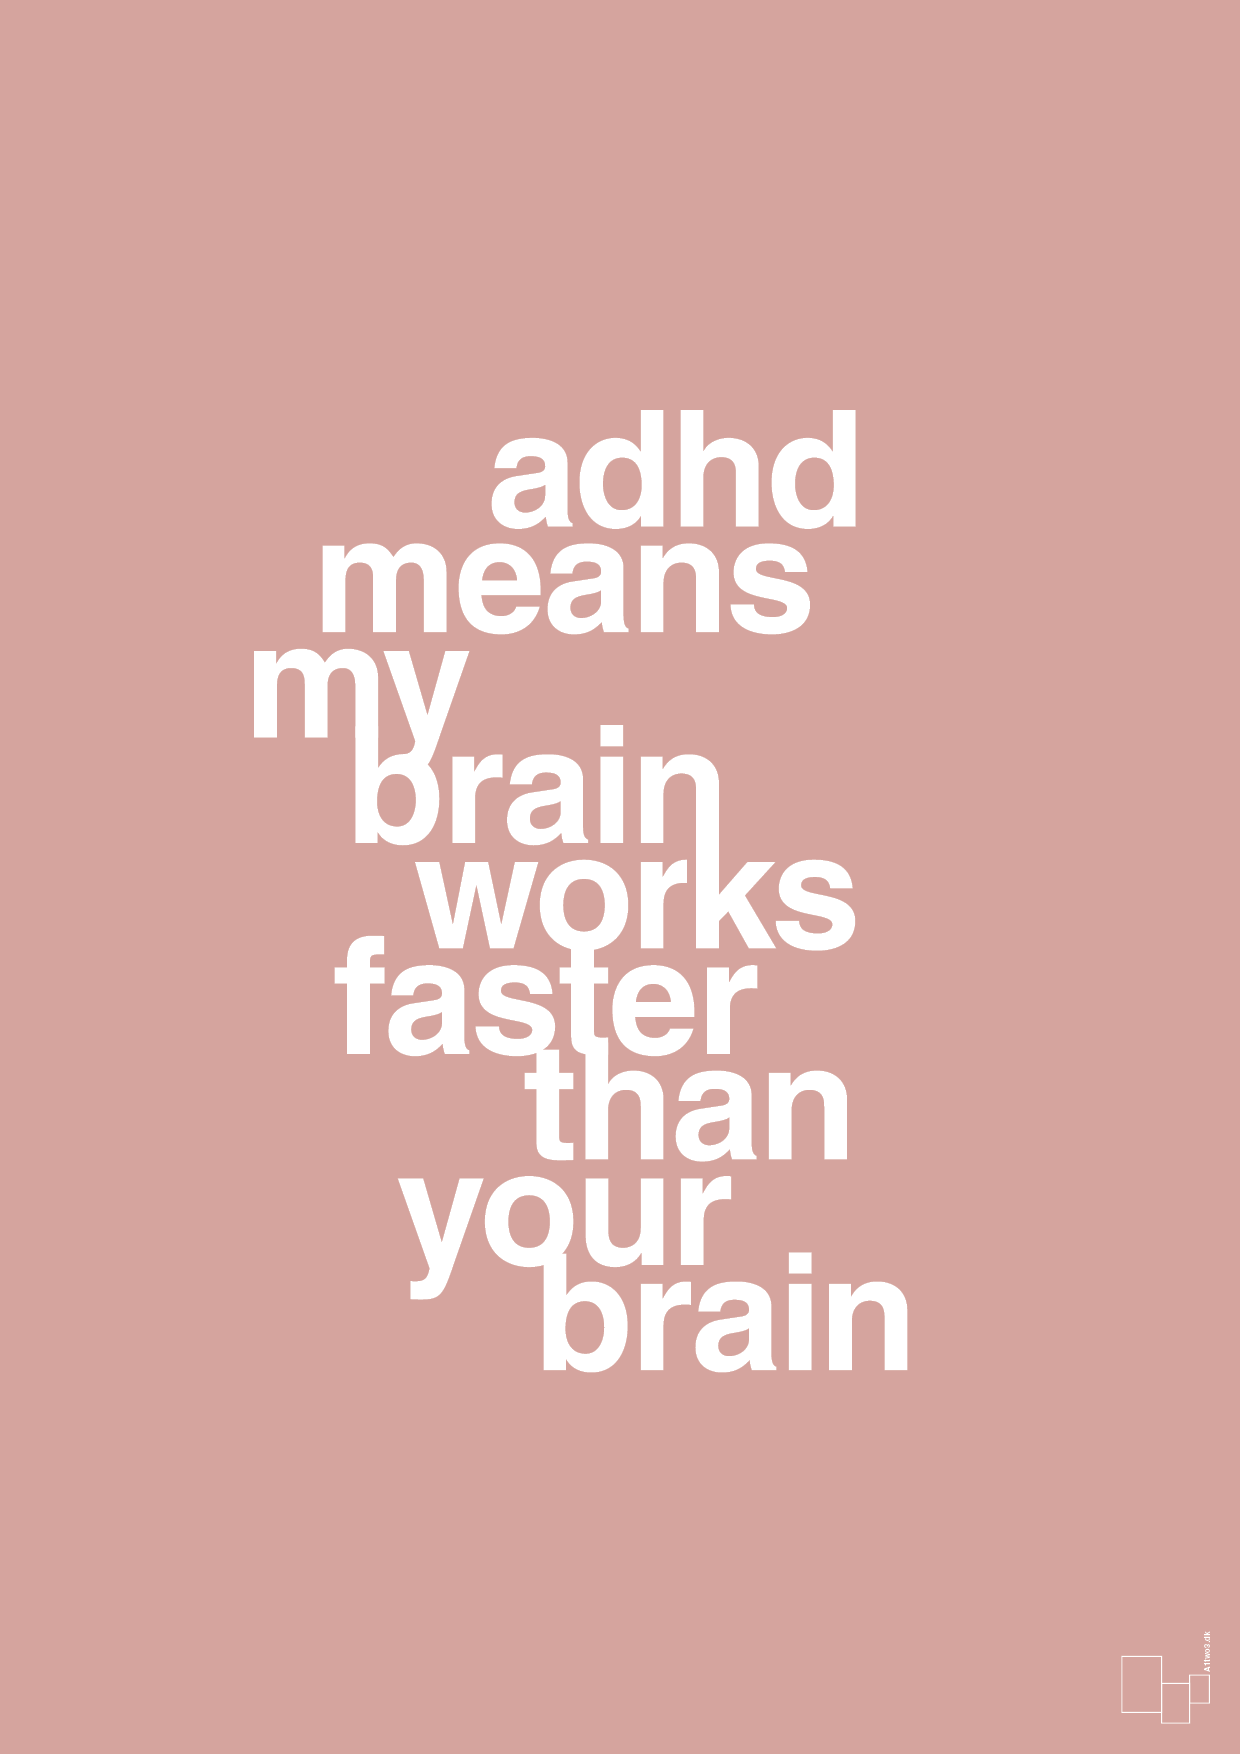 adhd means my brain works faster than your brain - Plakat med Samfund i Bubble Shell